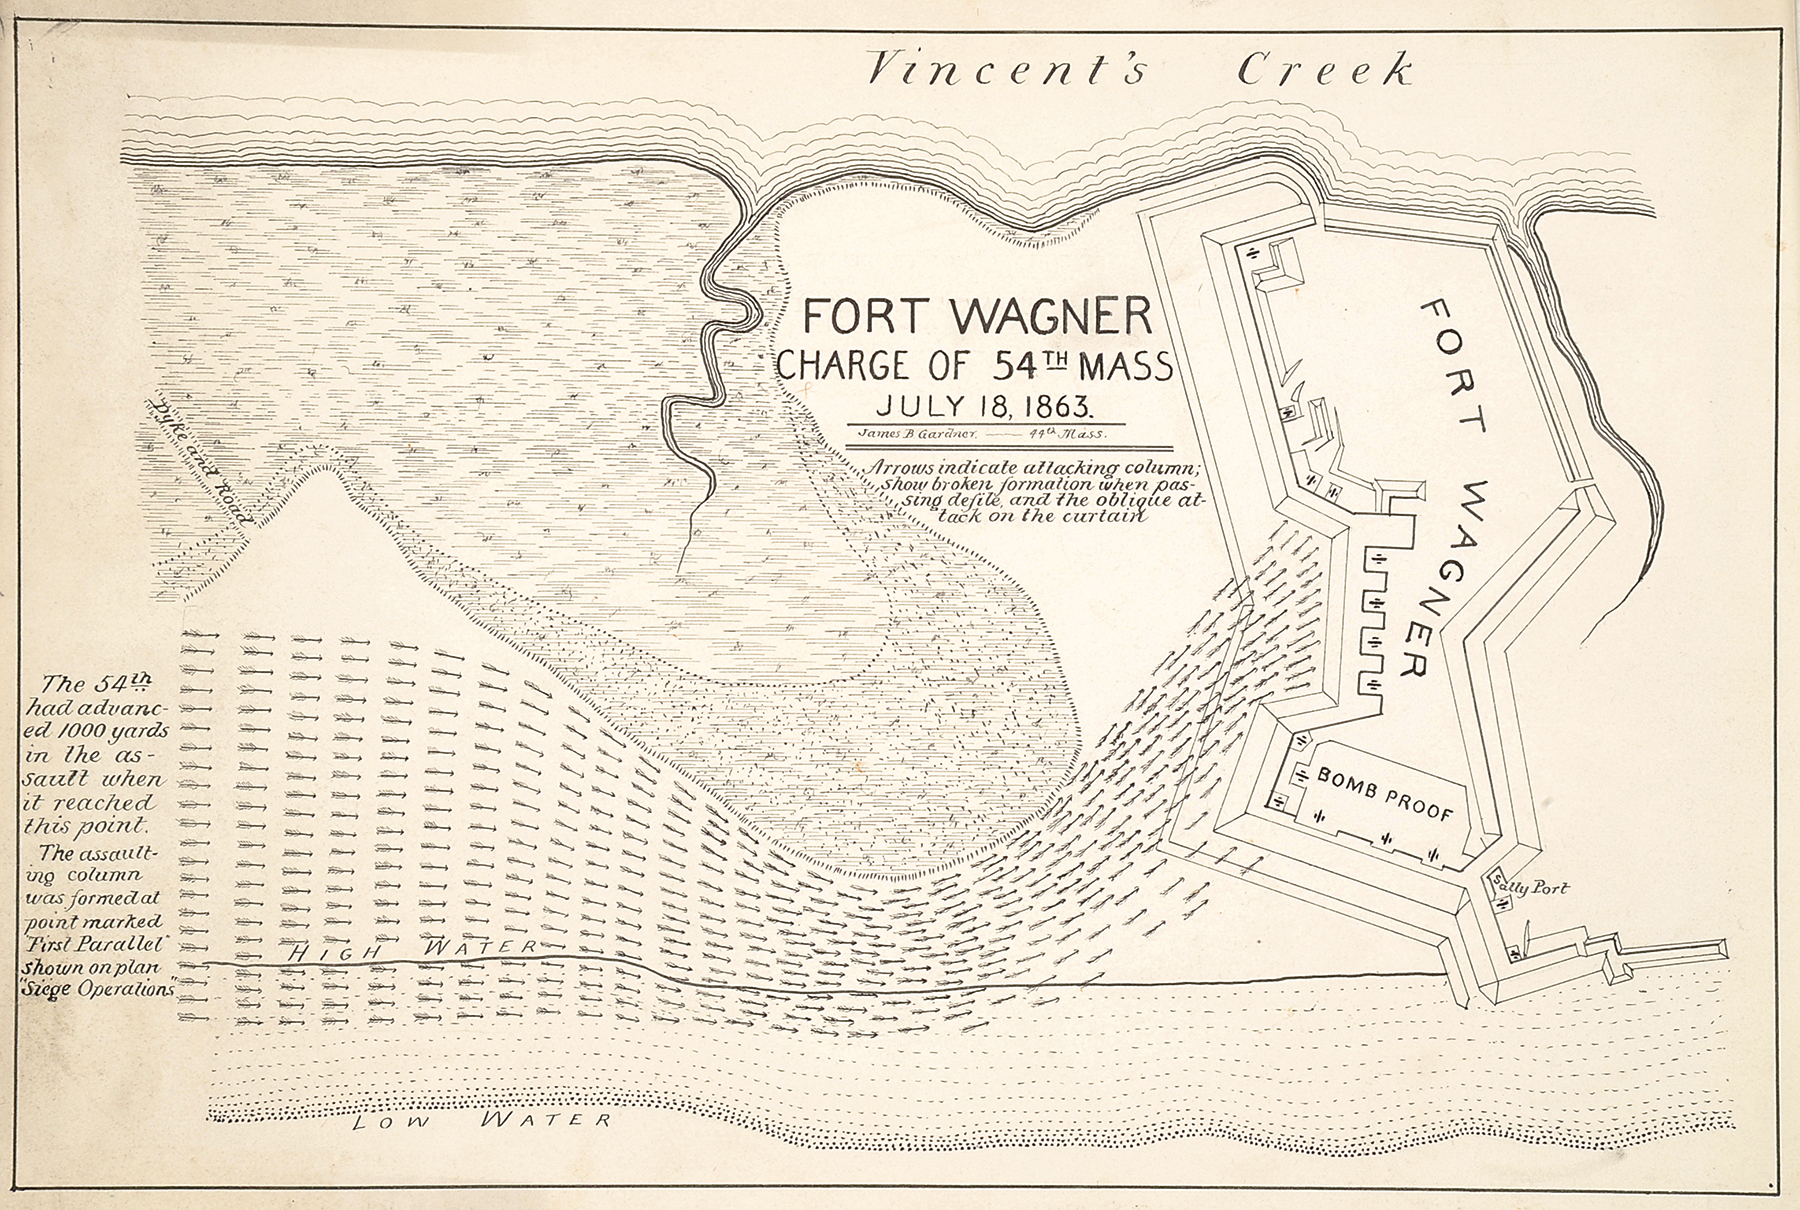 Hand Drawn Map Of Fort Wagner From The Emilio Civil War Archive